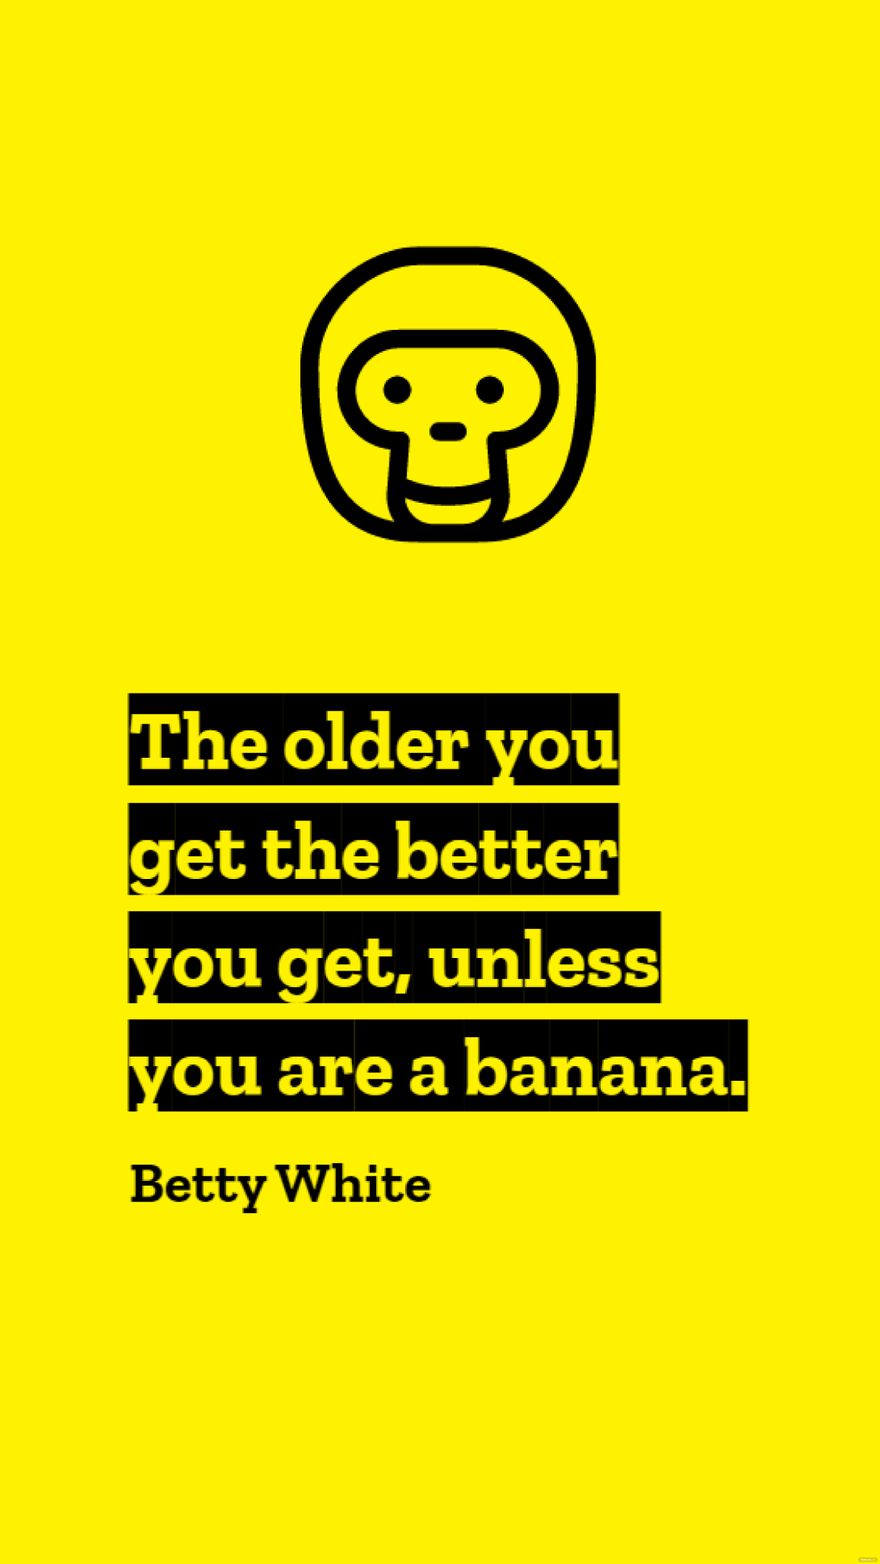 Betty White - The older you get the better you get, unless you are a banana.